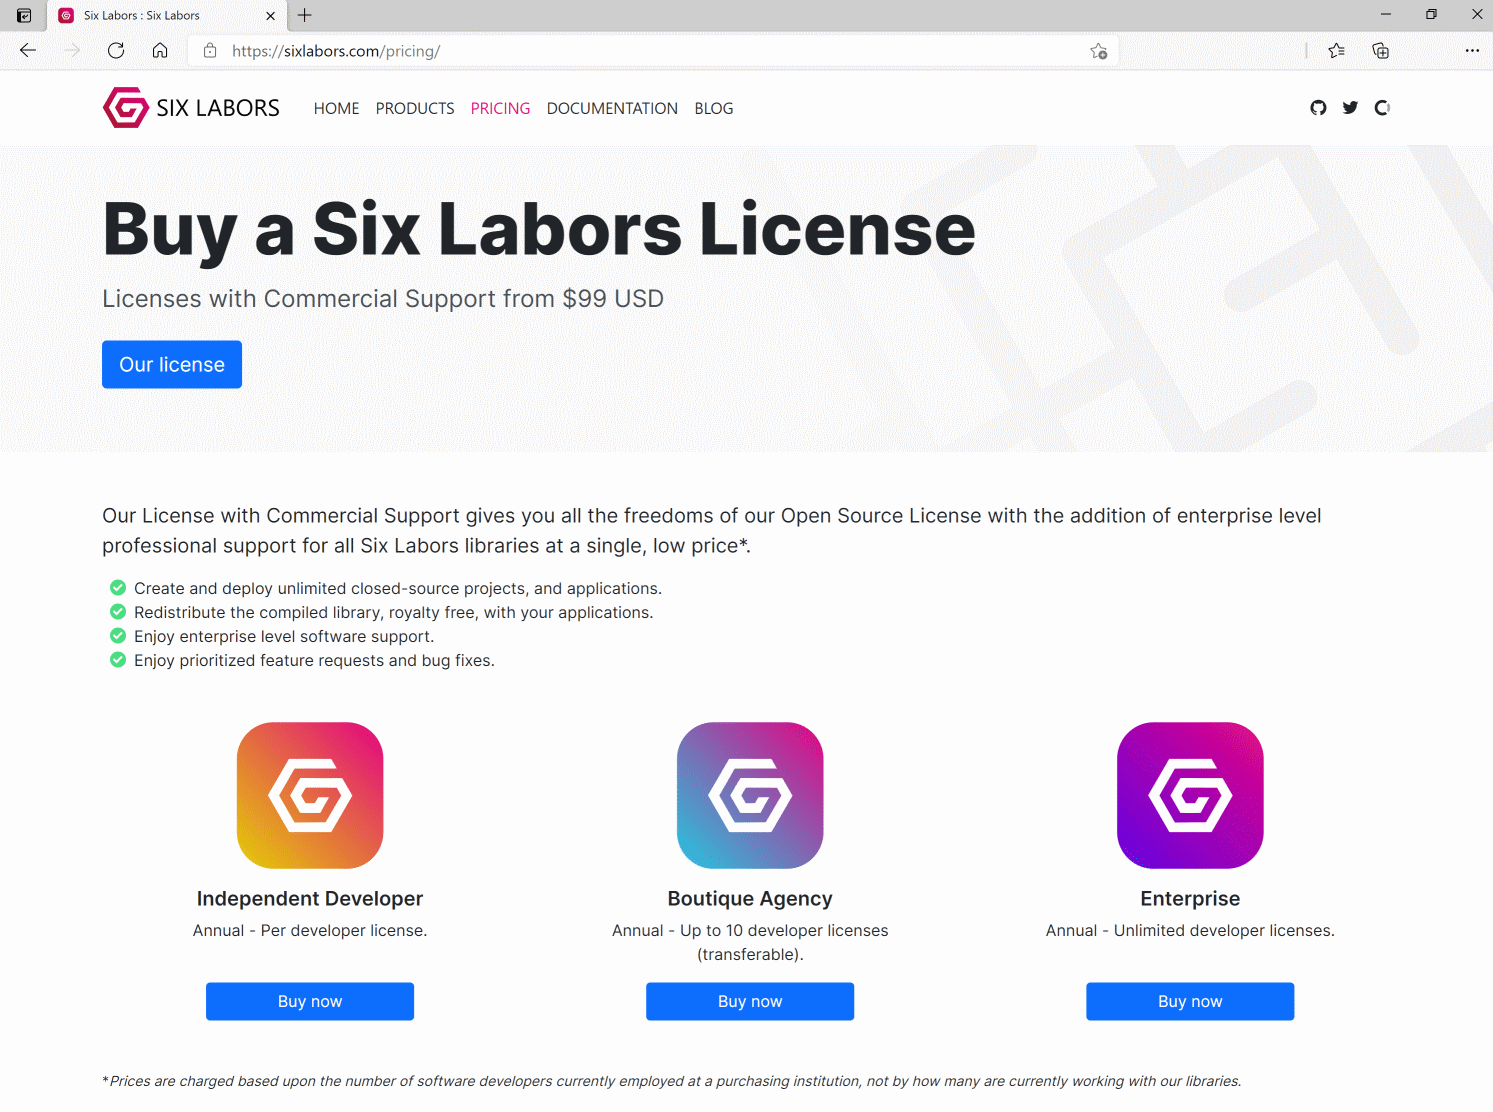 Six Labors pricing page